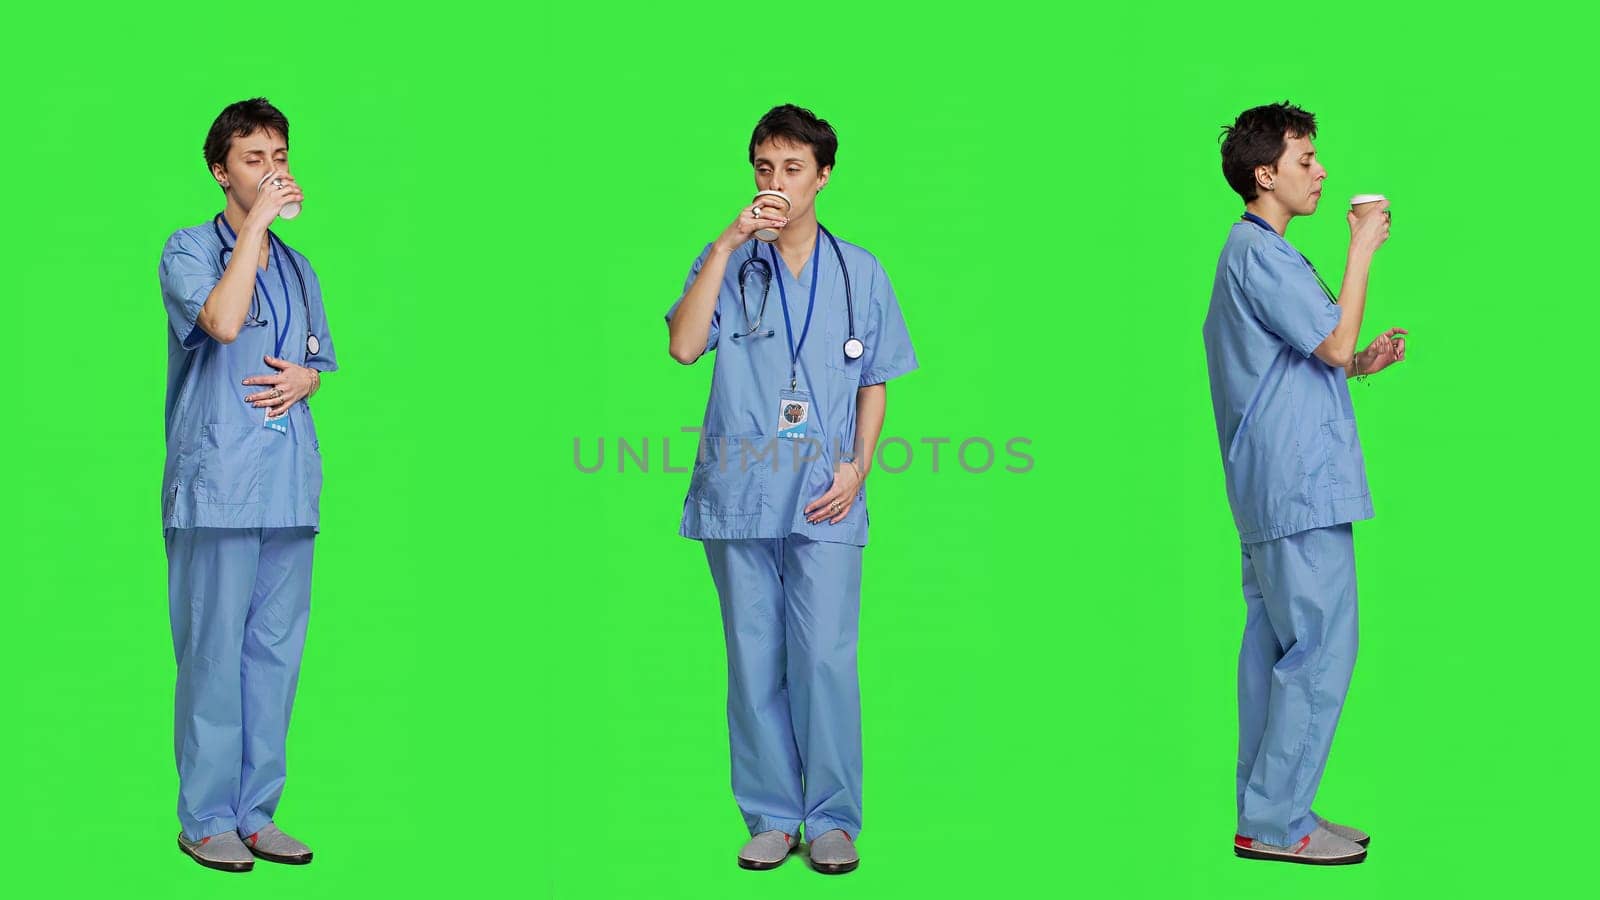 Healthcare specialist enjoying hot coffee cup against greenscreen backdrop by DCStudio